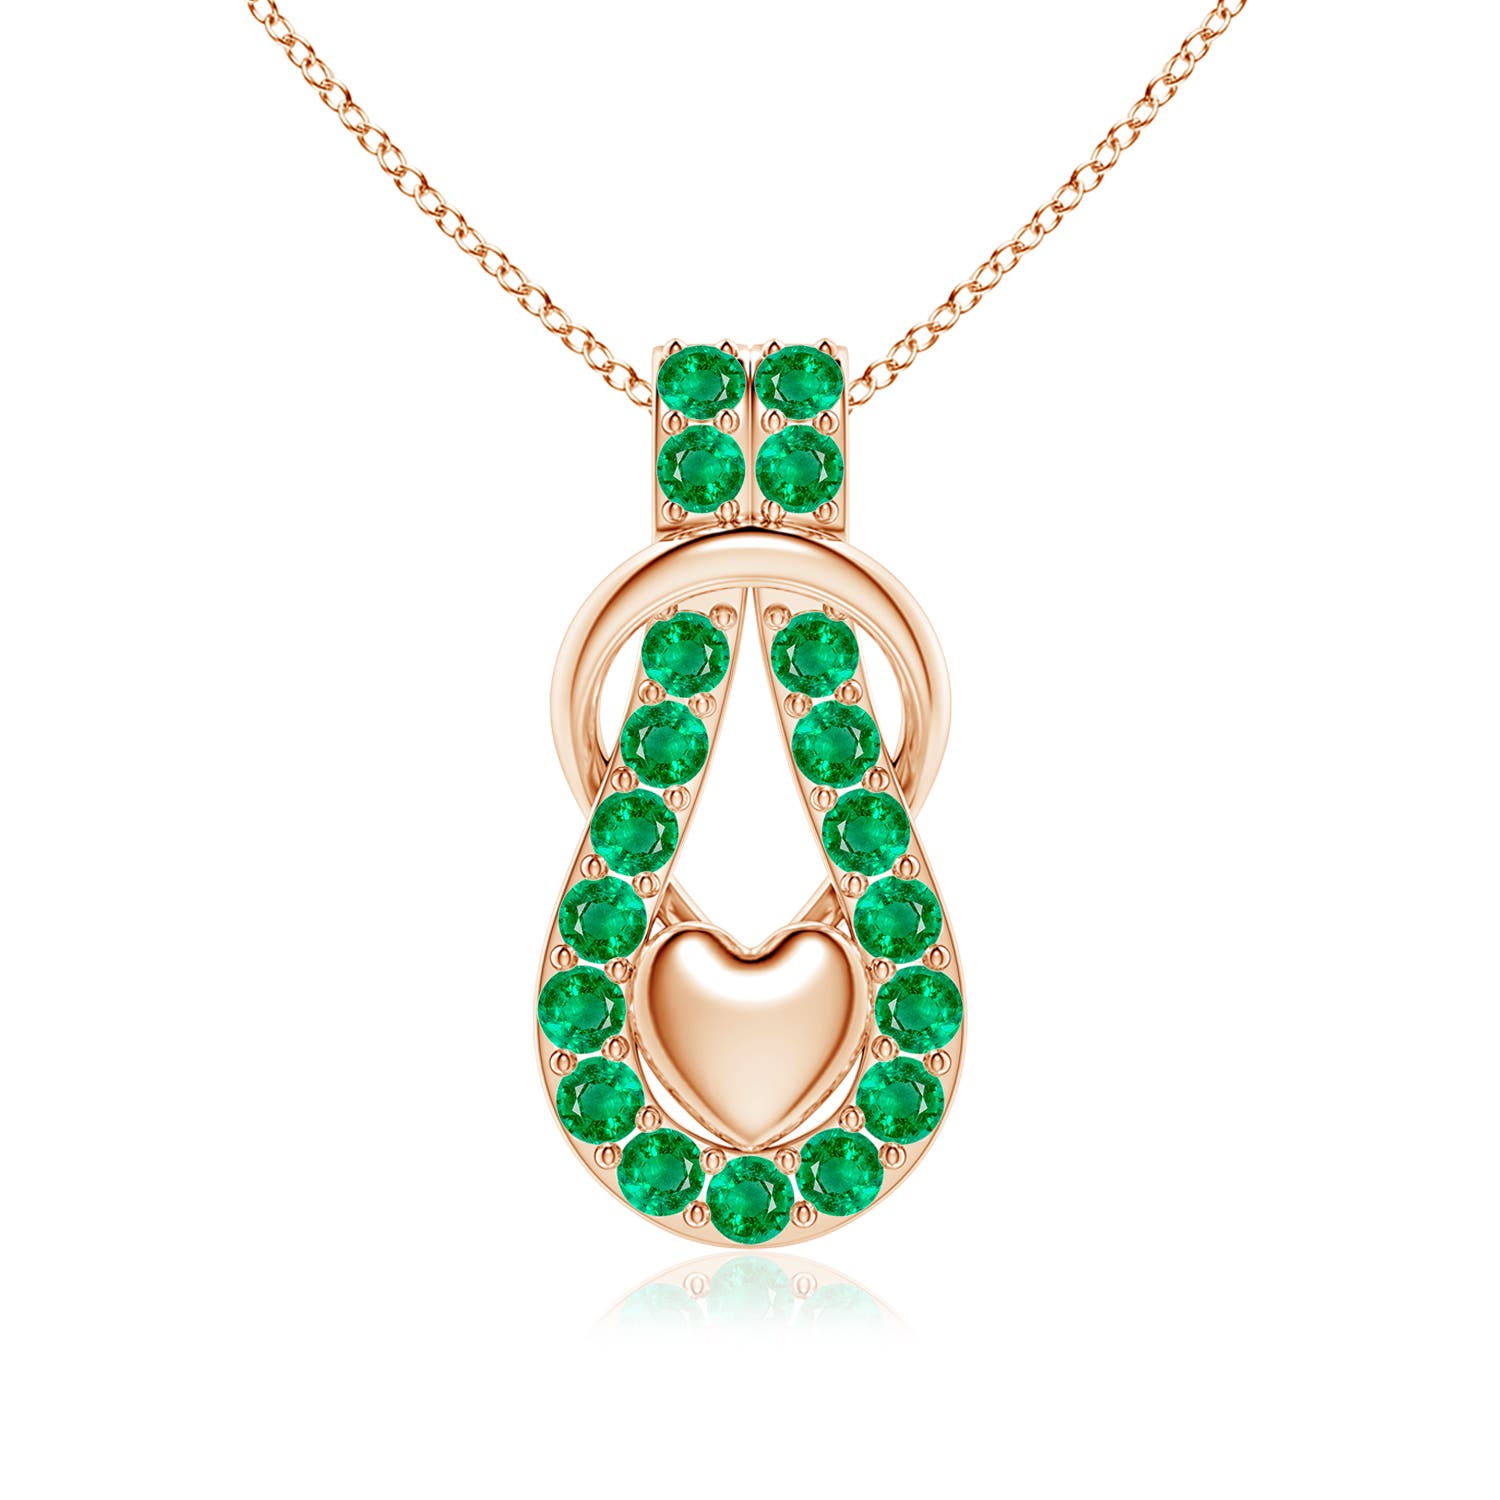 AAA - Emerald / 1.9 CT / 14 KT Rose Gold